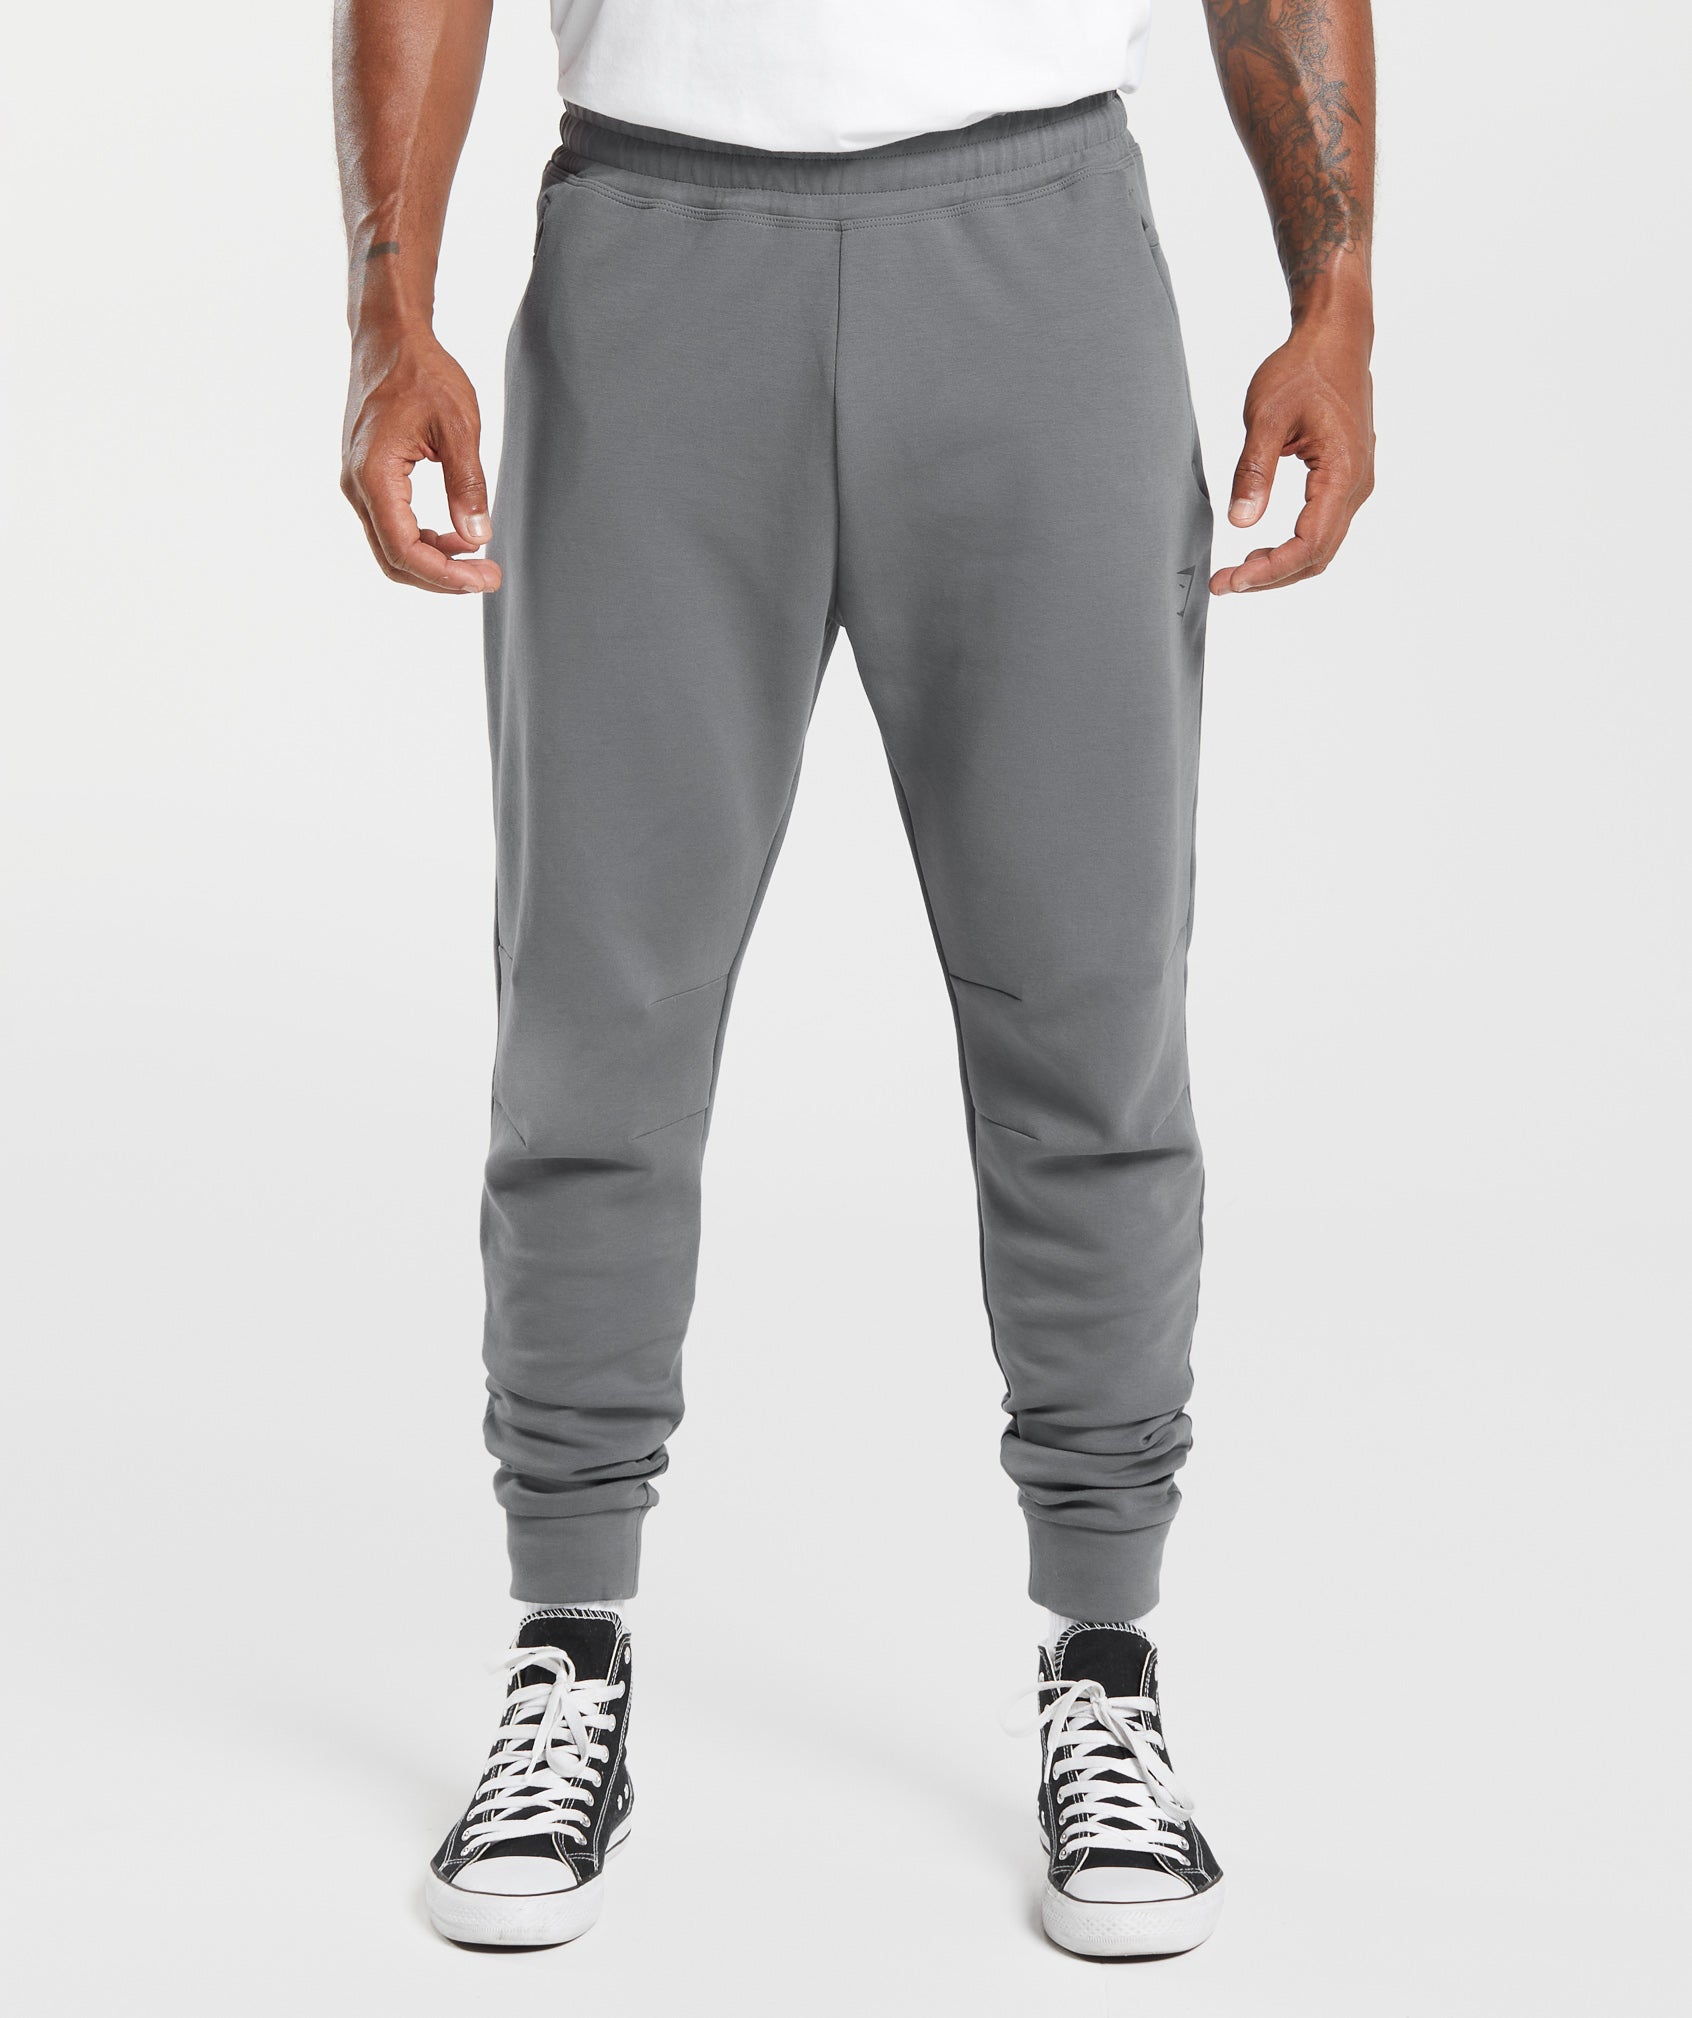 Gymshark Rest Day Knit Joggers - Navy